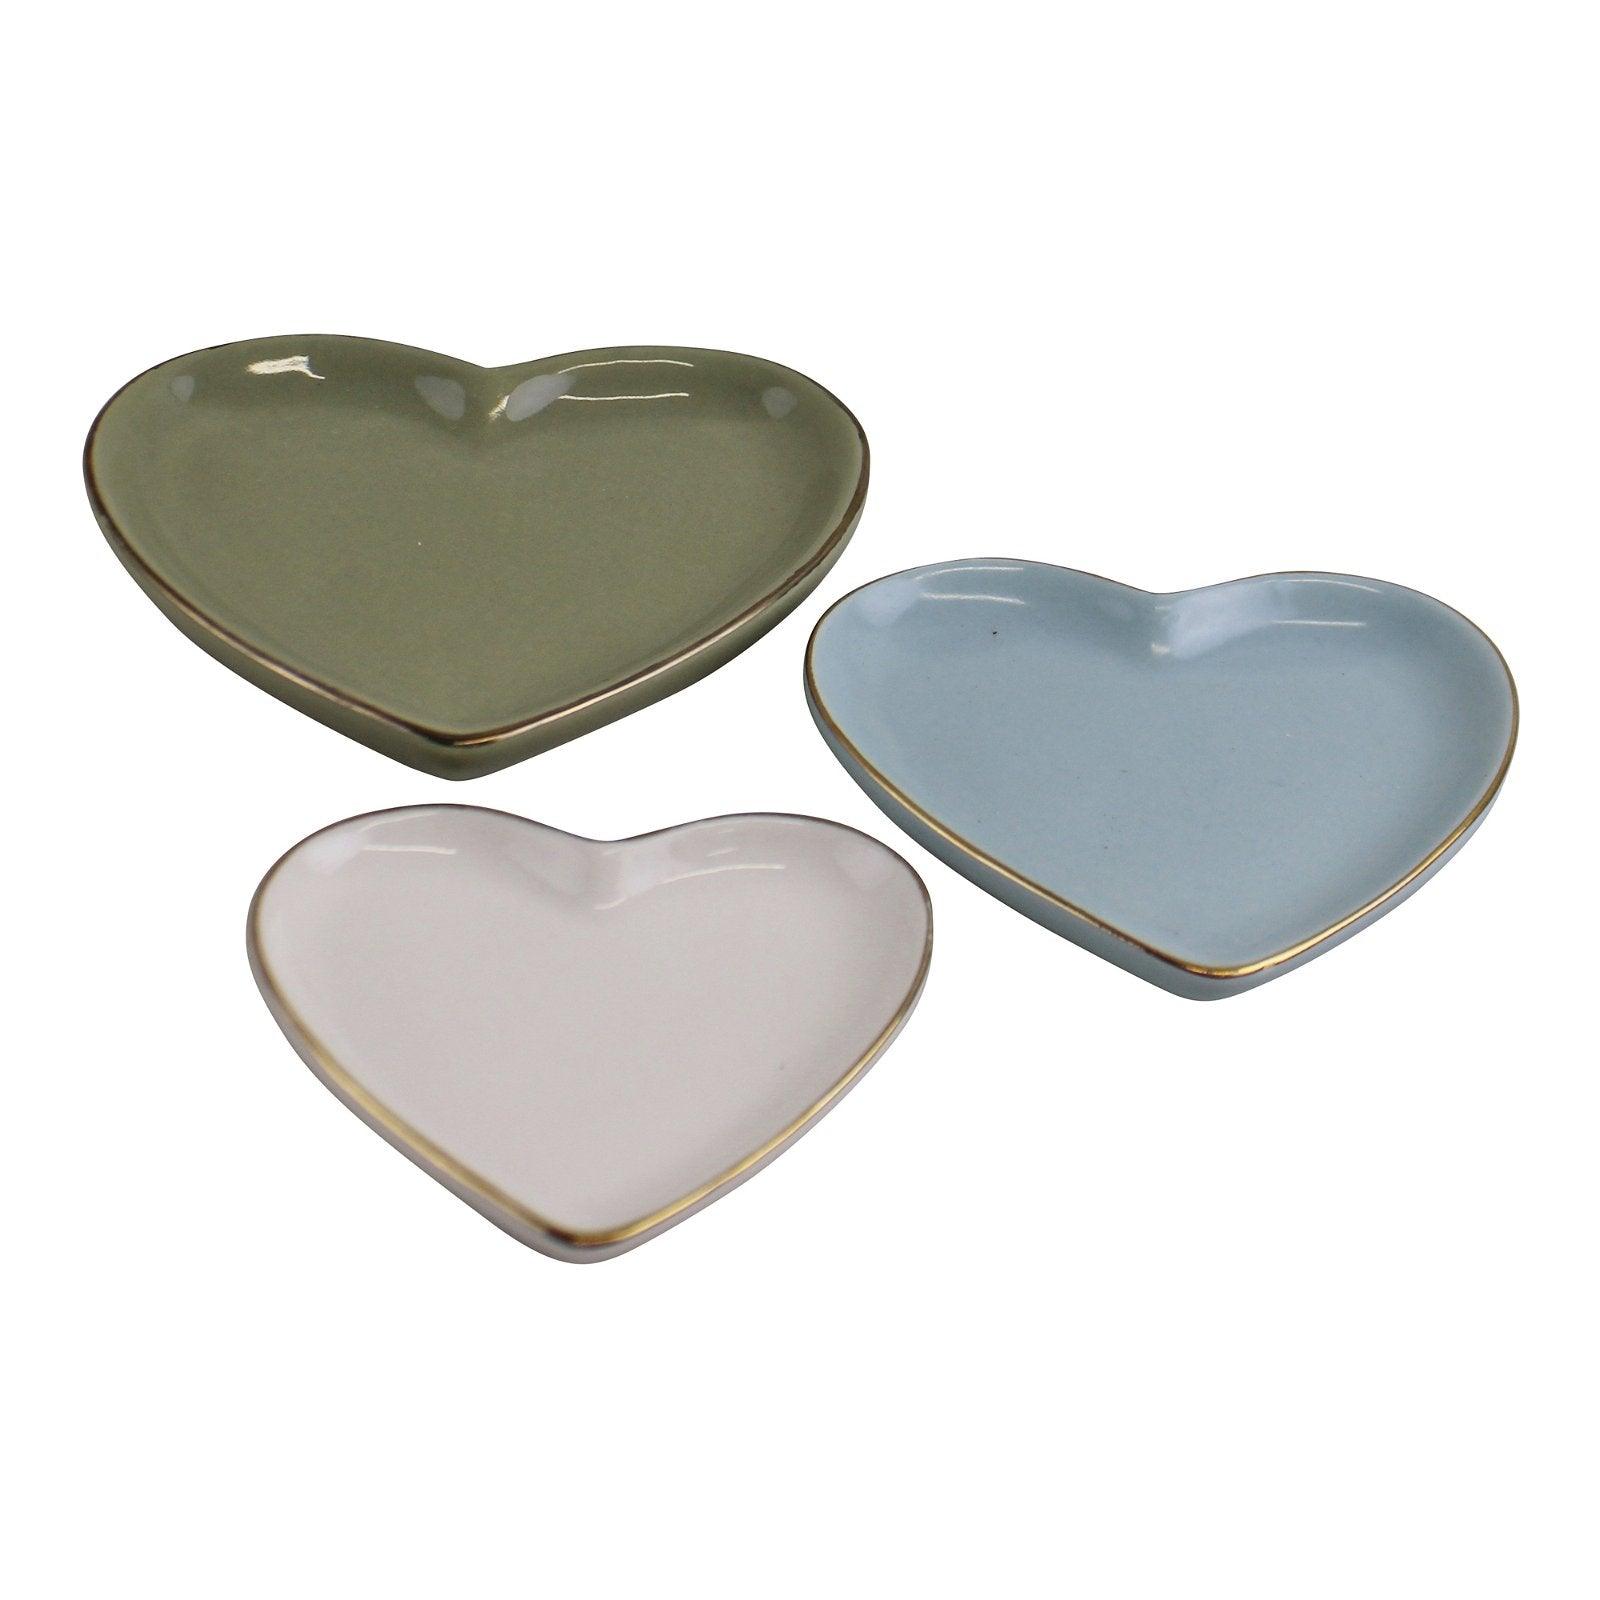 View Set Of 3 Heart Shaped Ceramic Trinket Plates With A Gold Edge information